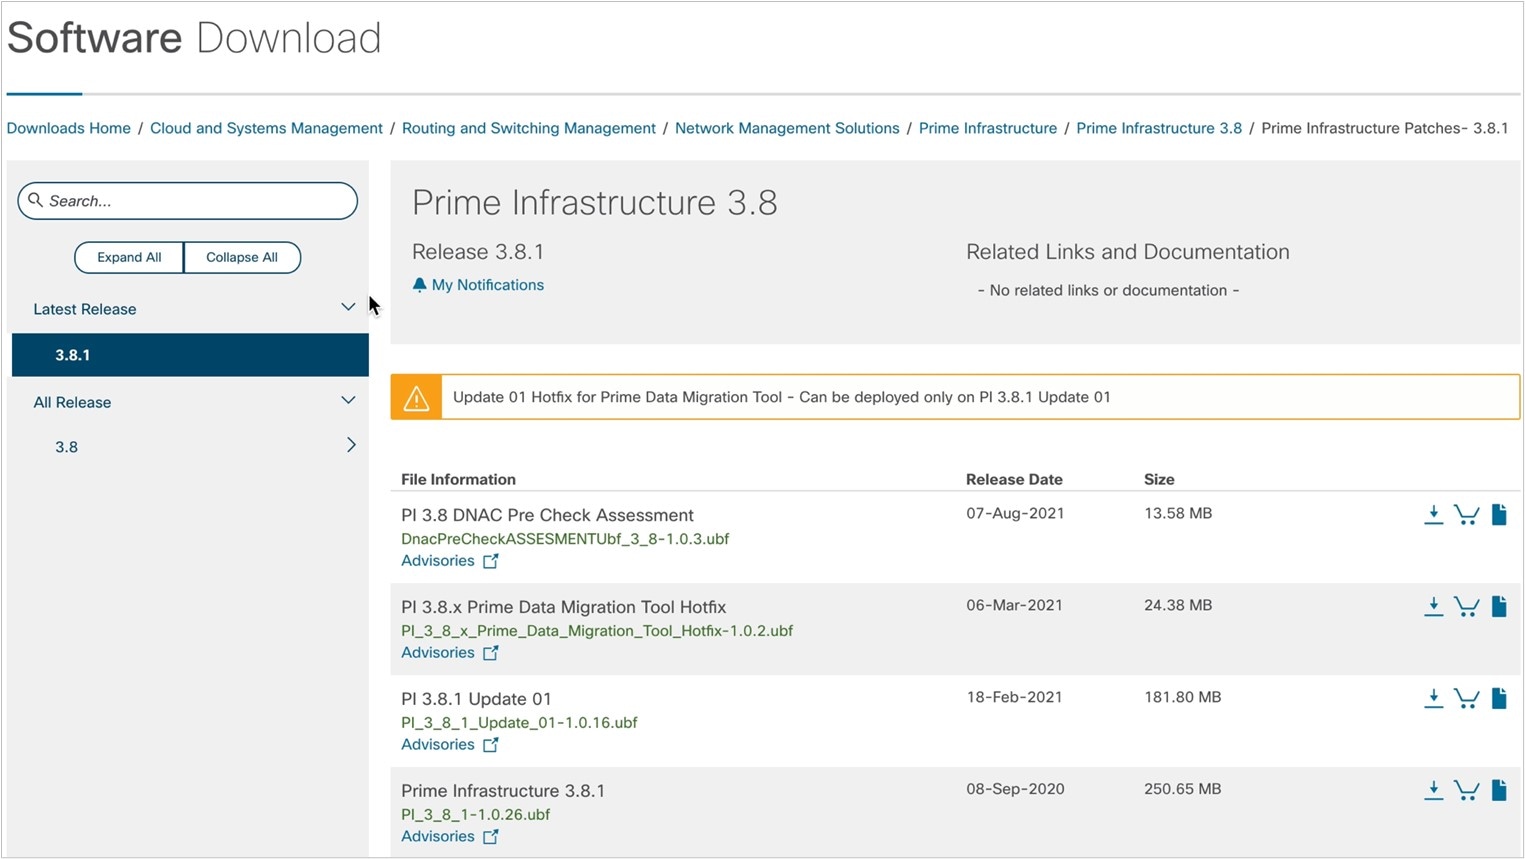 Cisco PDART Download for Cisco Prime Infrastructure 3.8